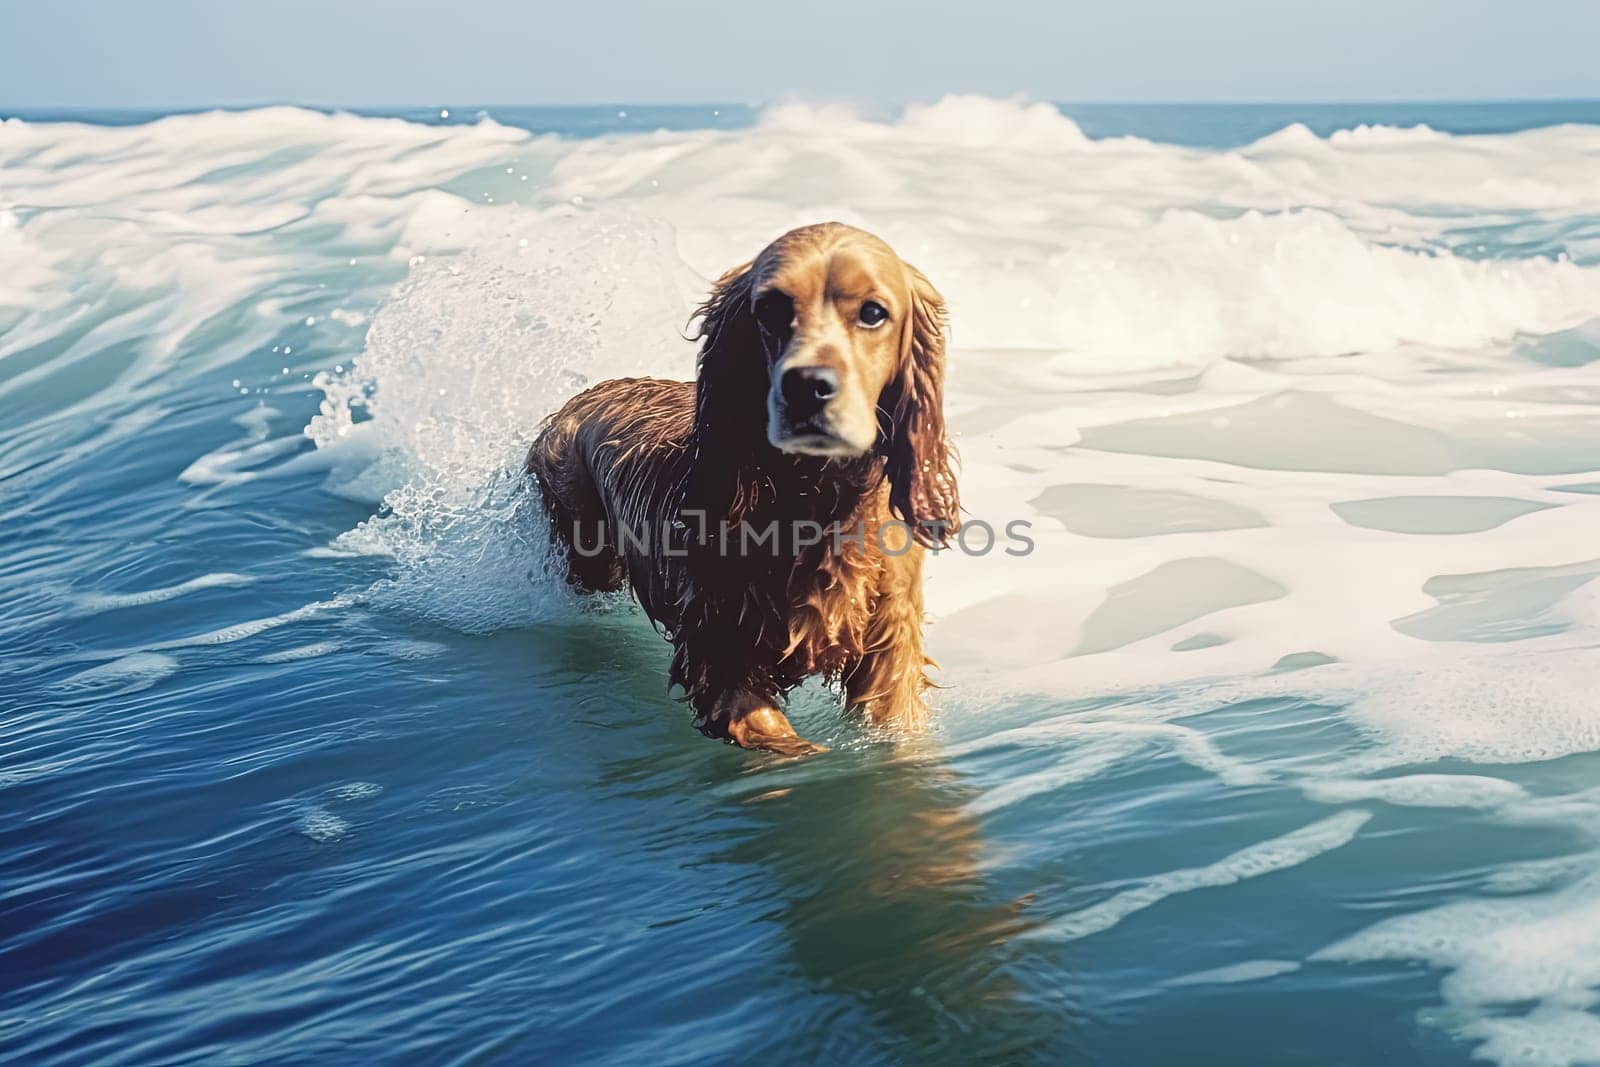 A playful dog splashes and frolics in the water by Alla_Morozova93